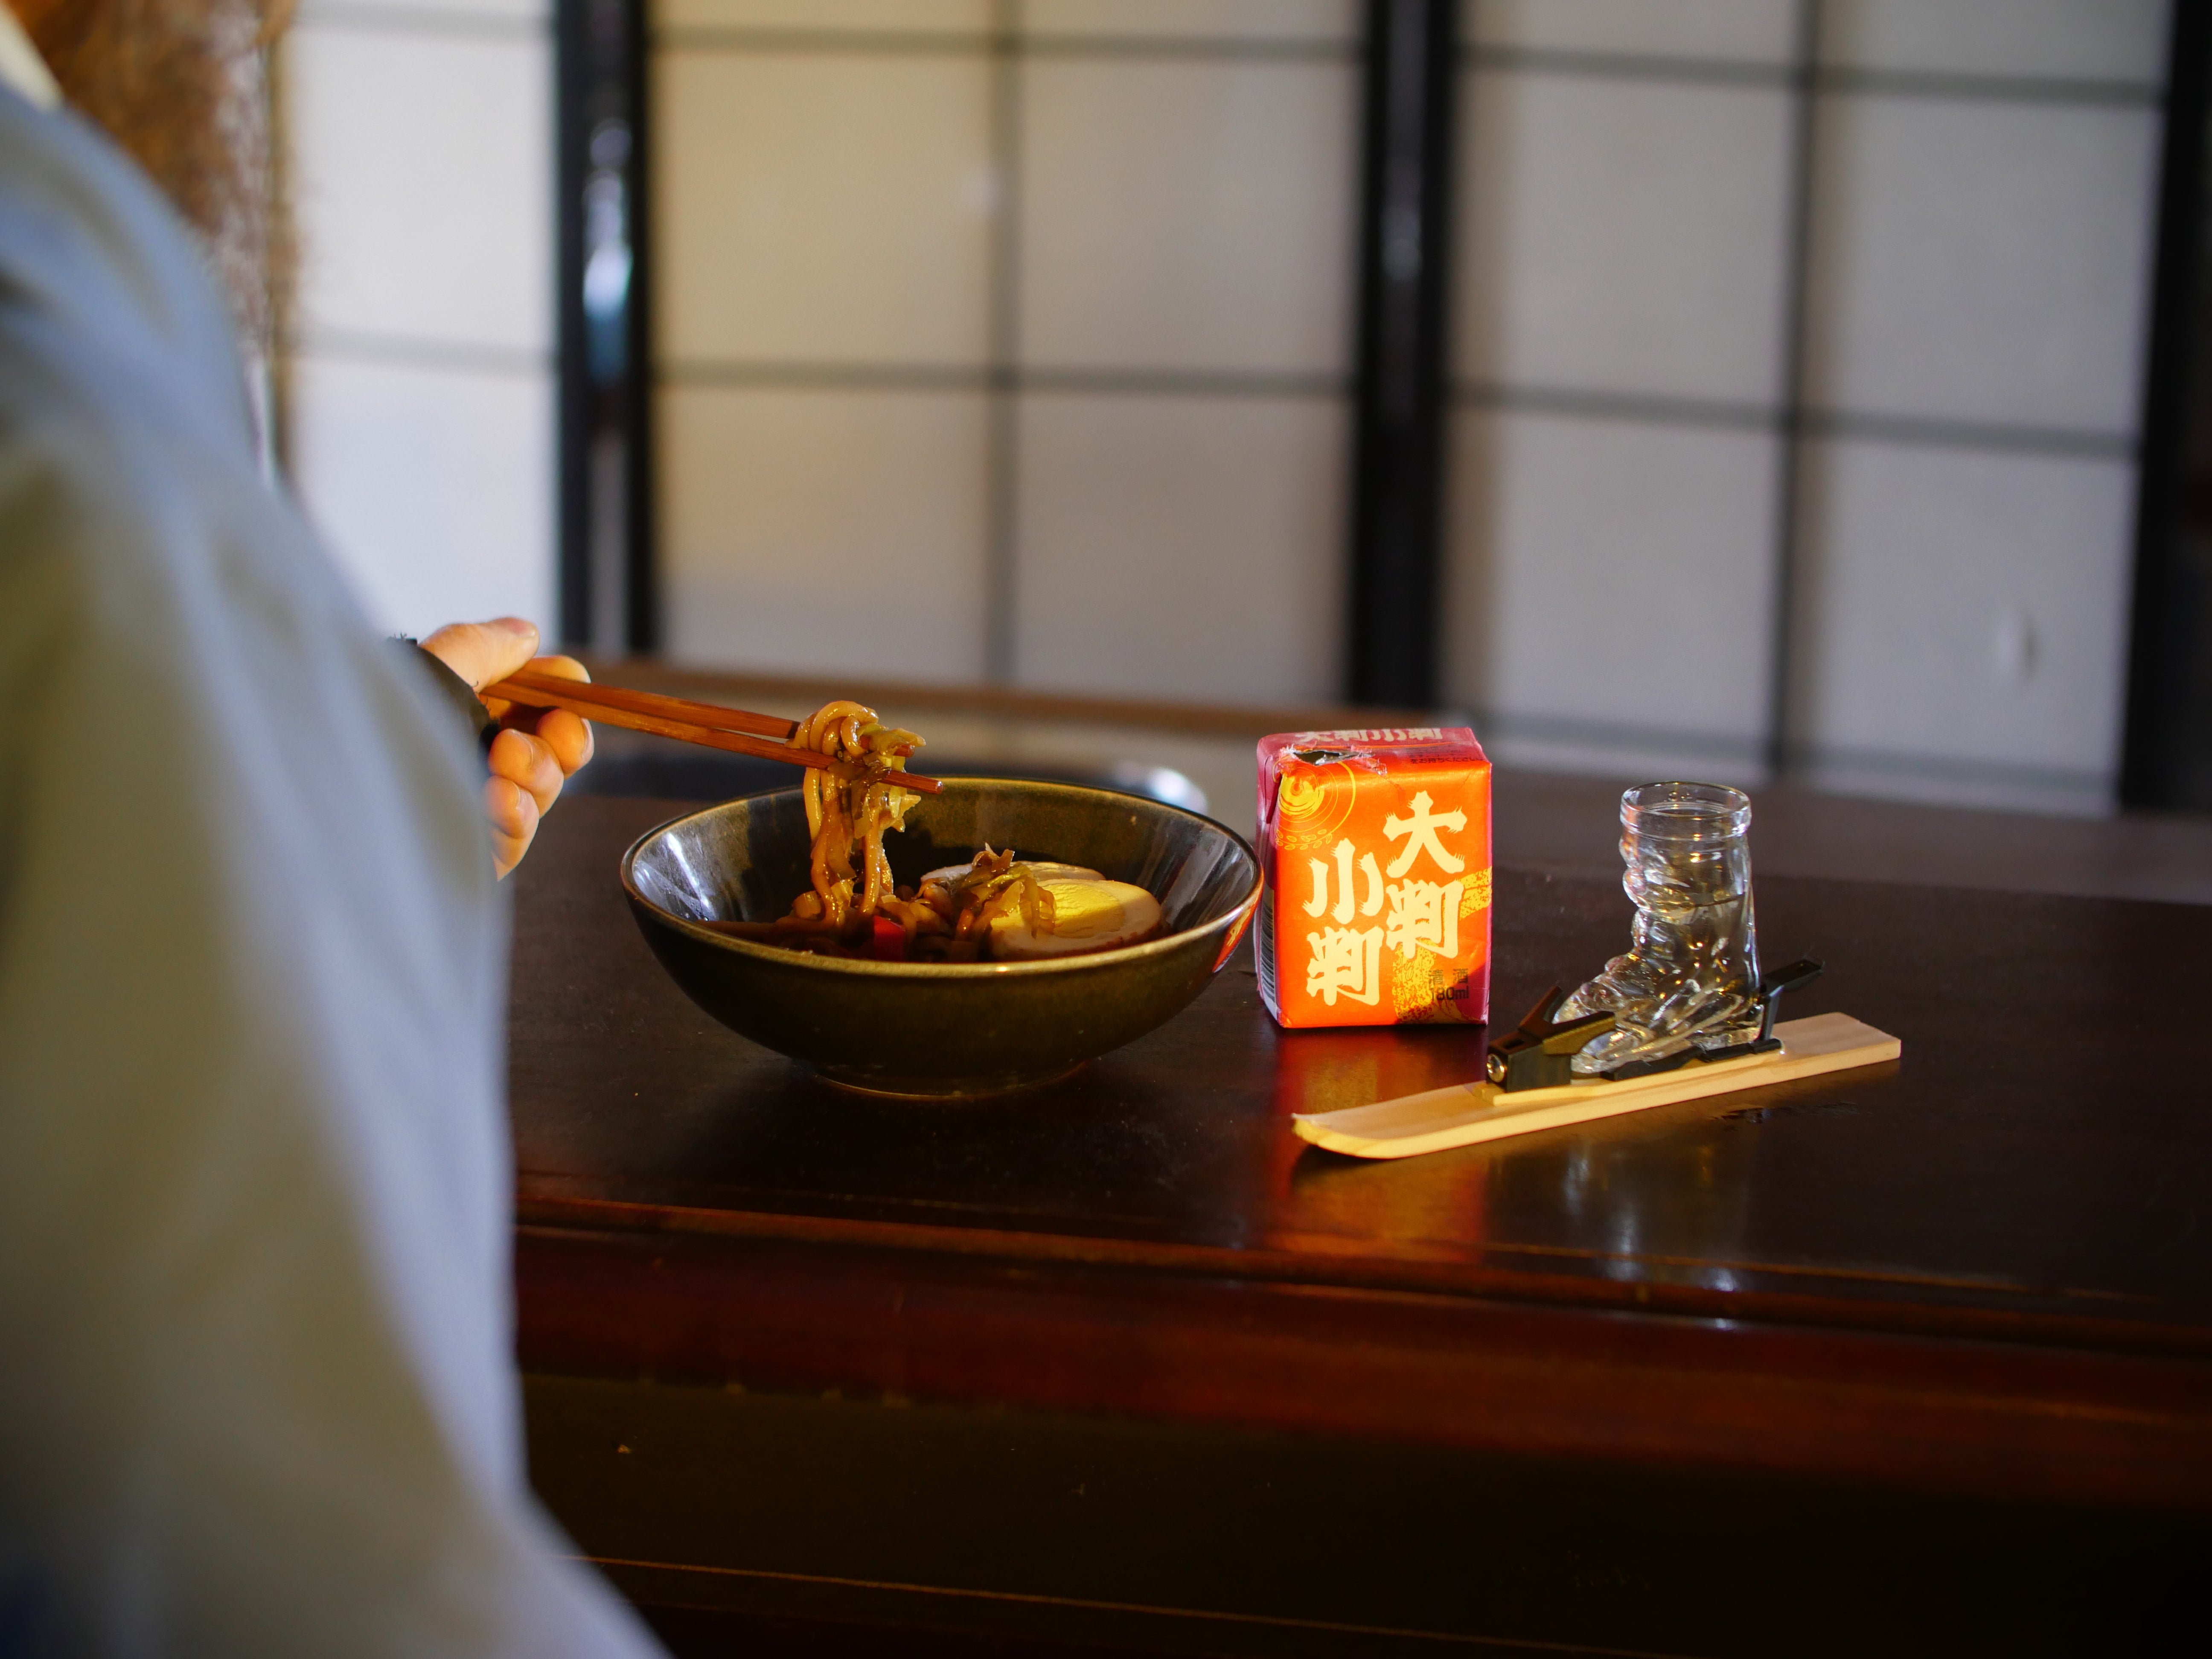 Photo of the mini-ski, fitted with the ski boot shot glass and bindings, on a wooden table in front of a Japanese style white screen/room divider. The table is set with a bowl of food, a pair of chopsticks and a small red box with asian symbols. A person in white is lifting the chopsticks filled with food.